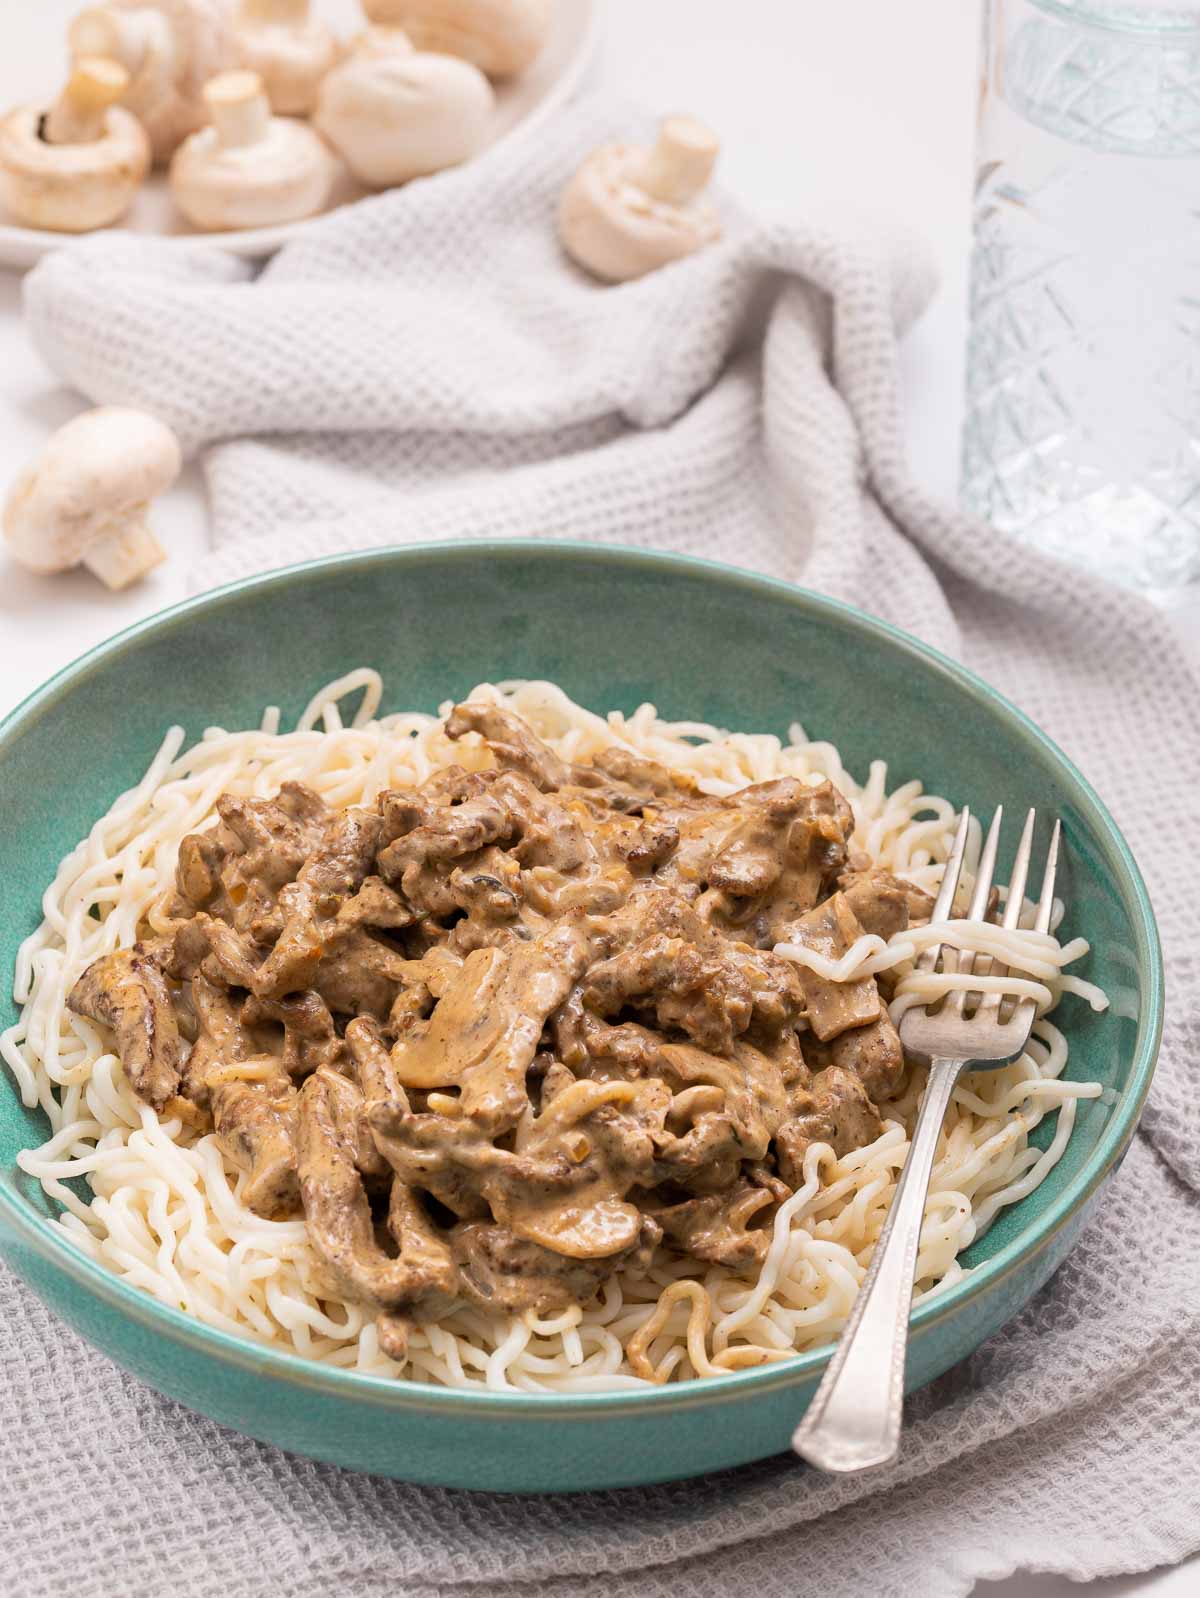 Noodles, mushrooms and beef strips in a creamy sauce.